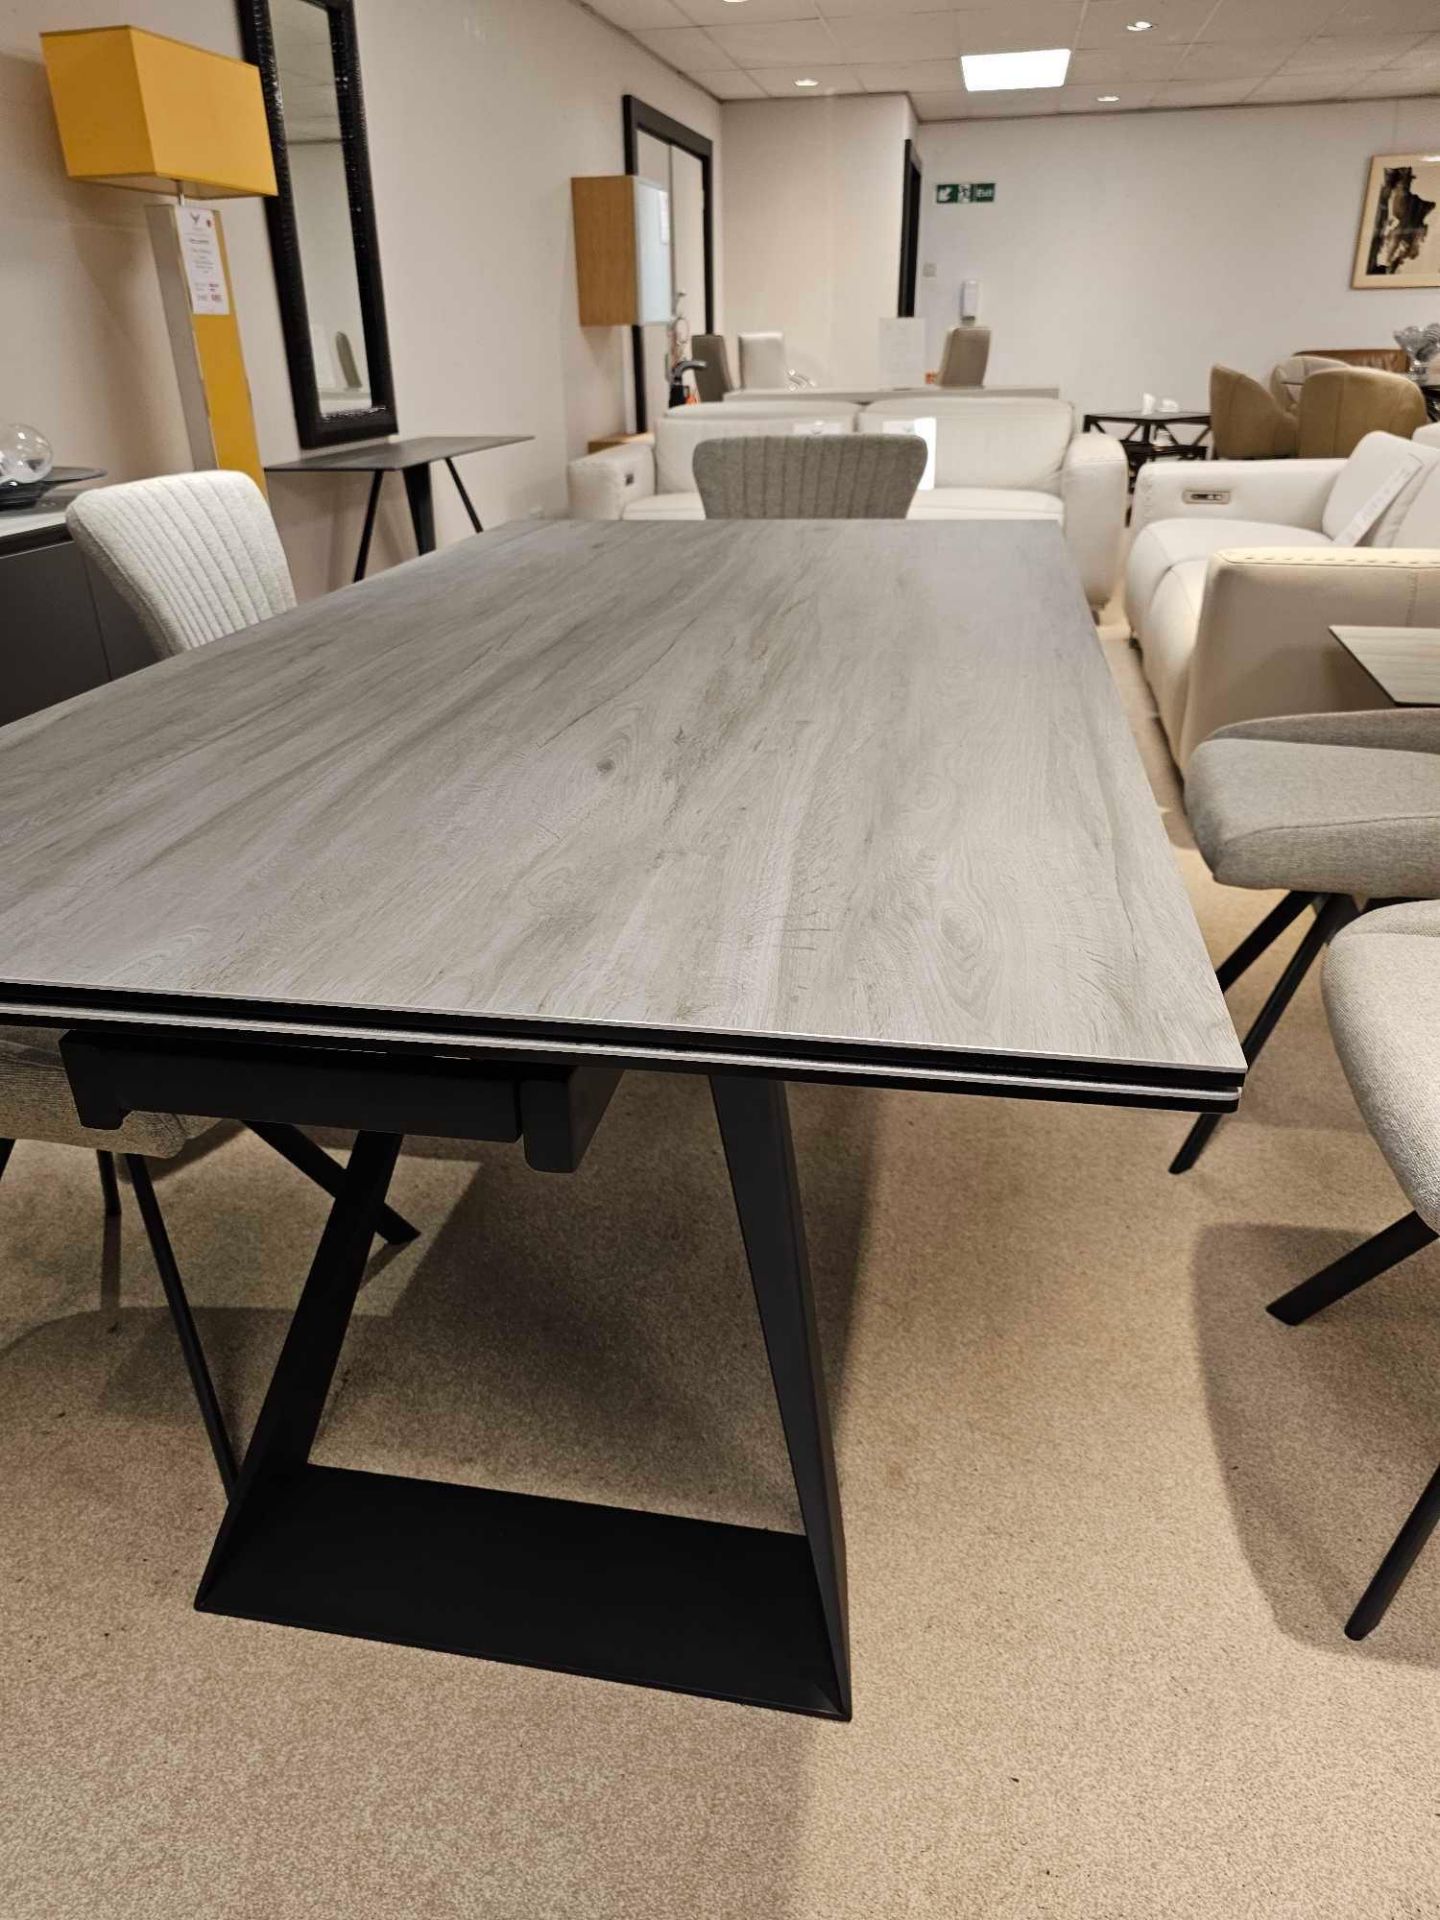 Spartan Dining Table by Kesterport The Spartan Dining Table is part of a sophisticated collection of - Image 9 of 12